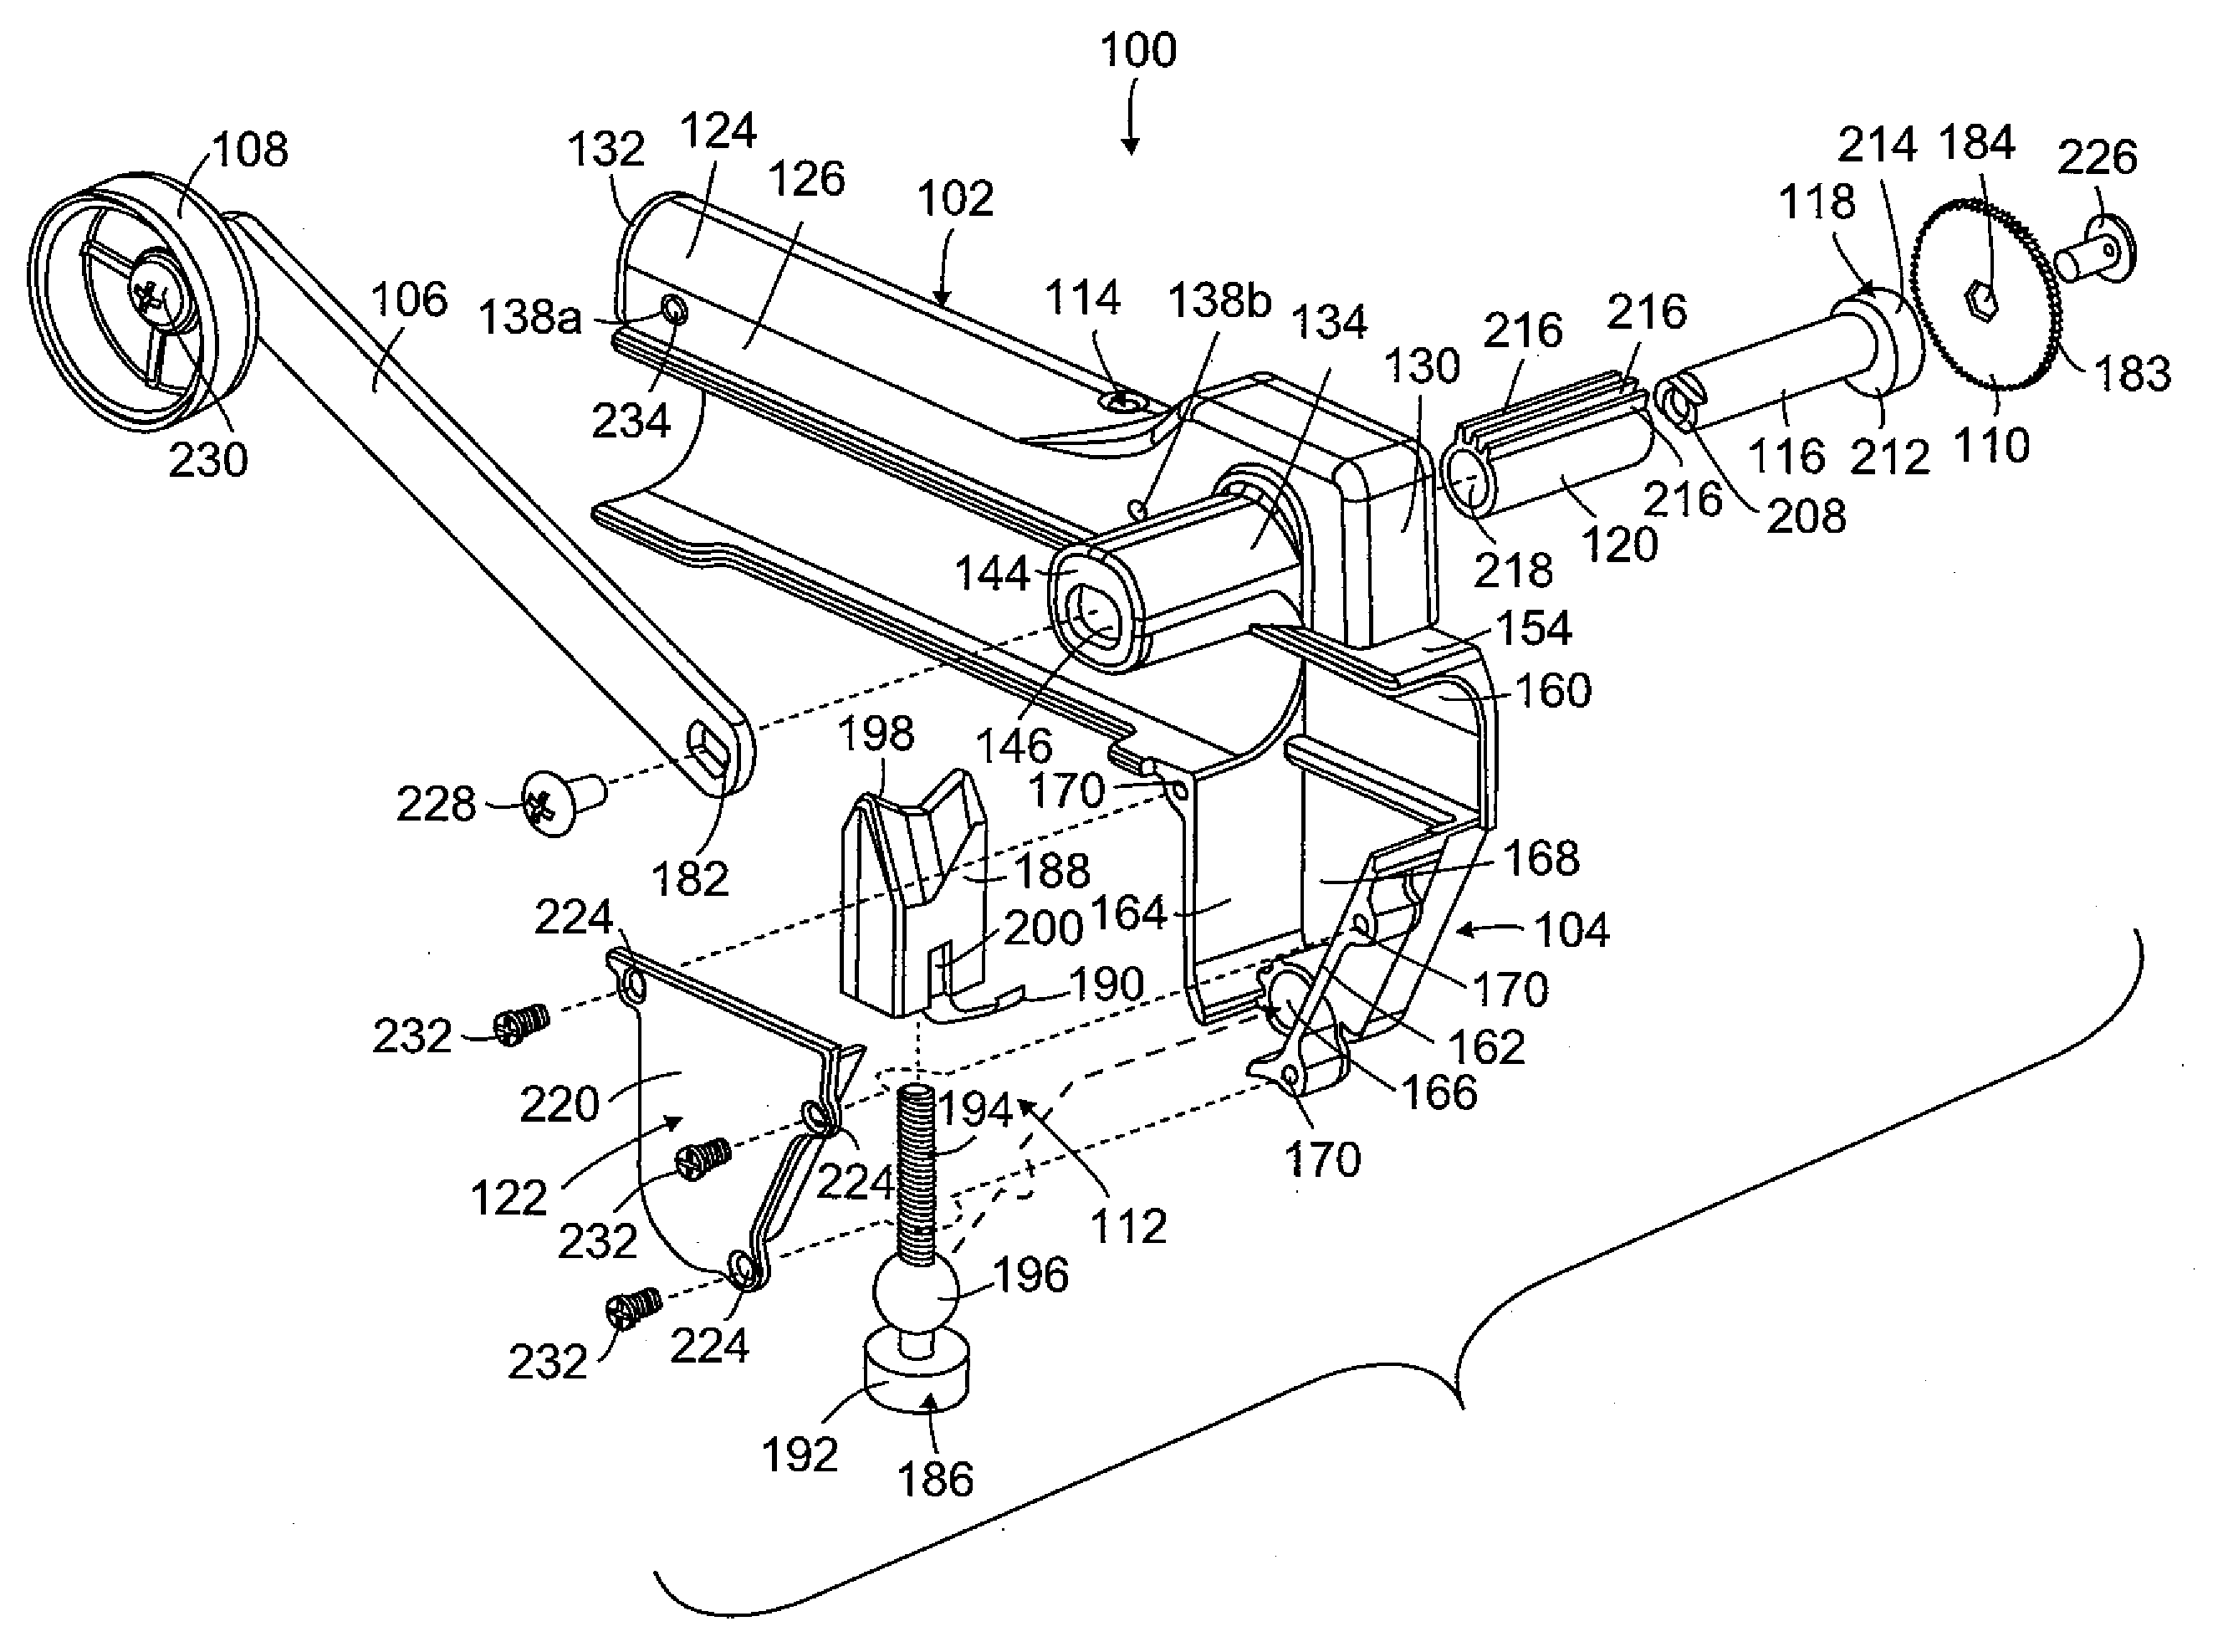 Cable cutter with reciprocating cutting wheel for cutting flexible cable